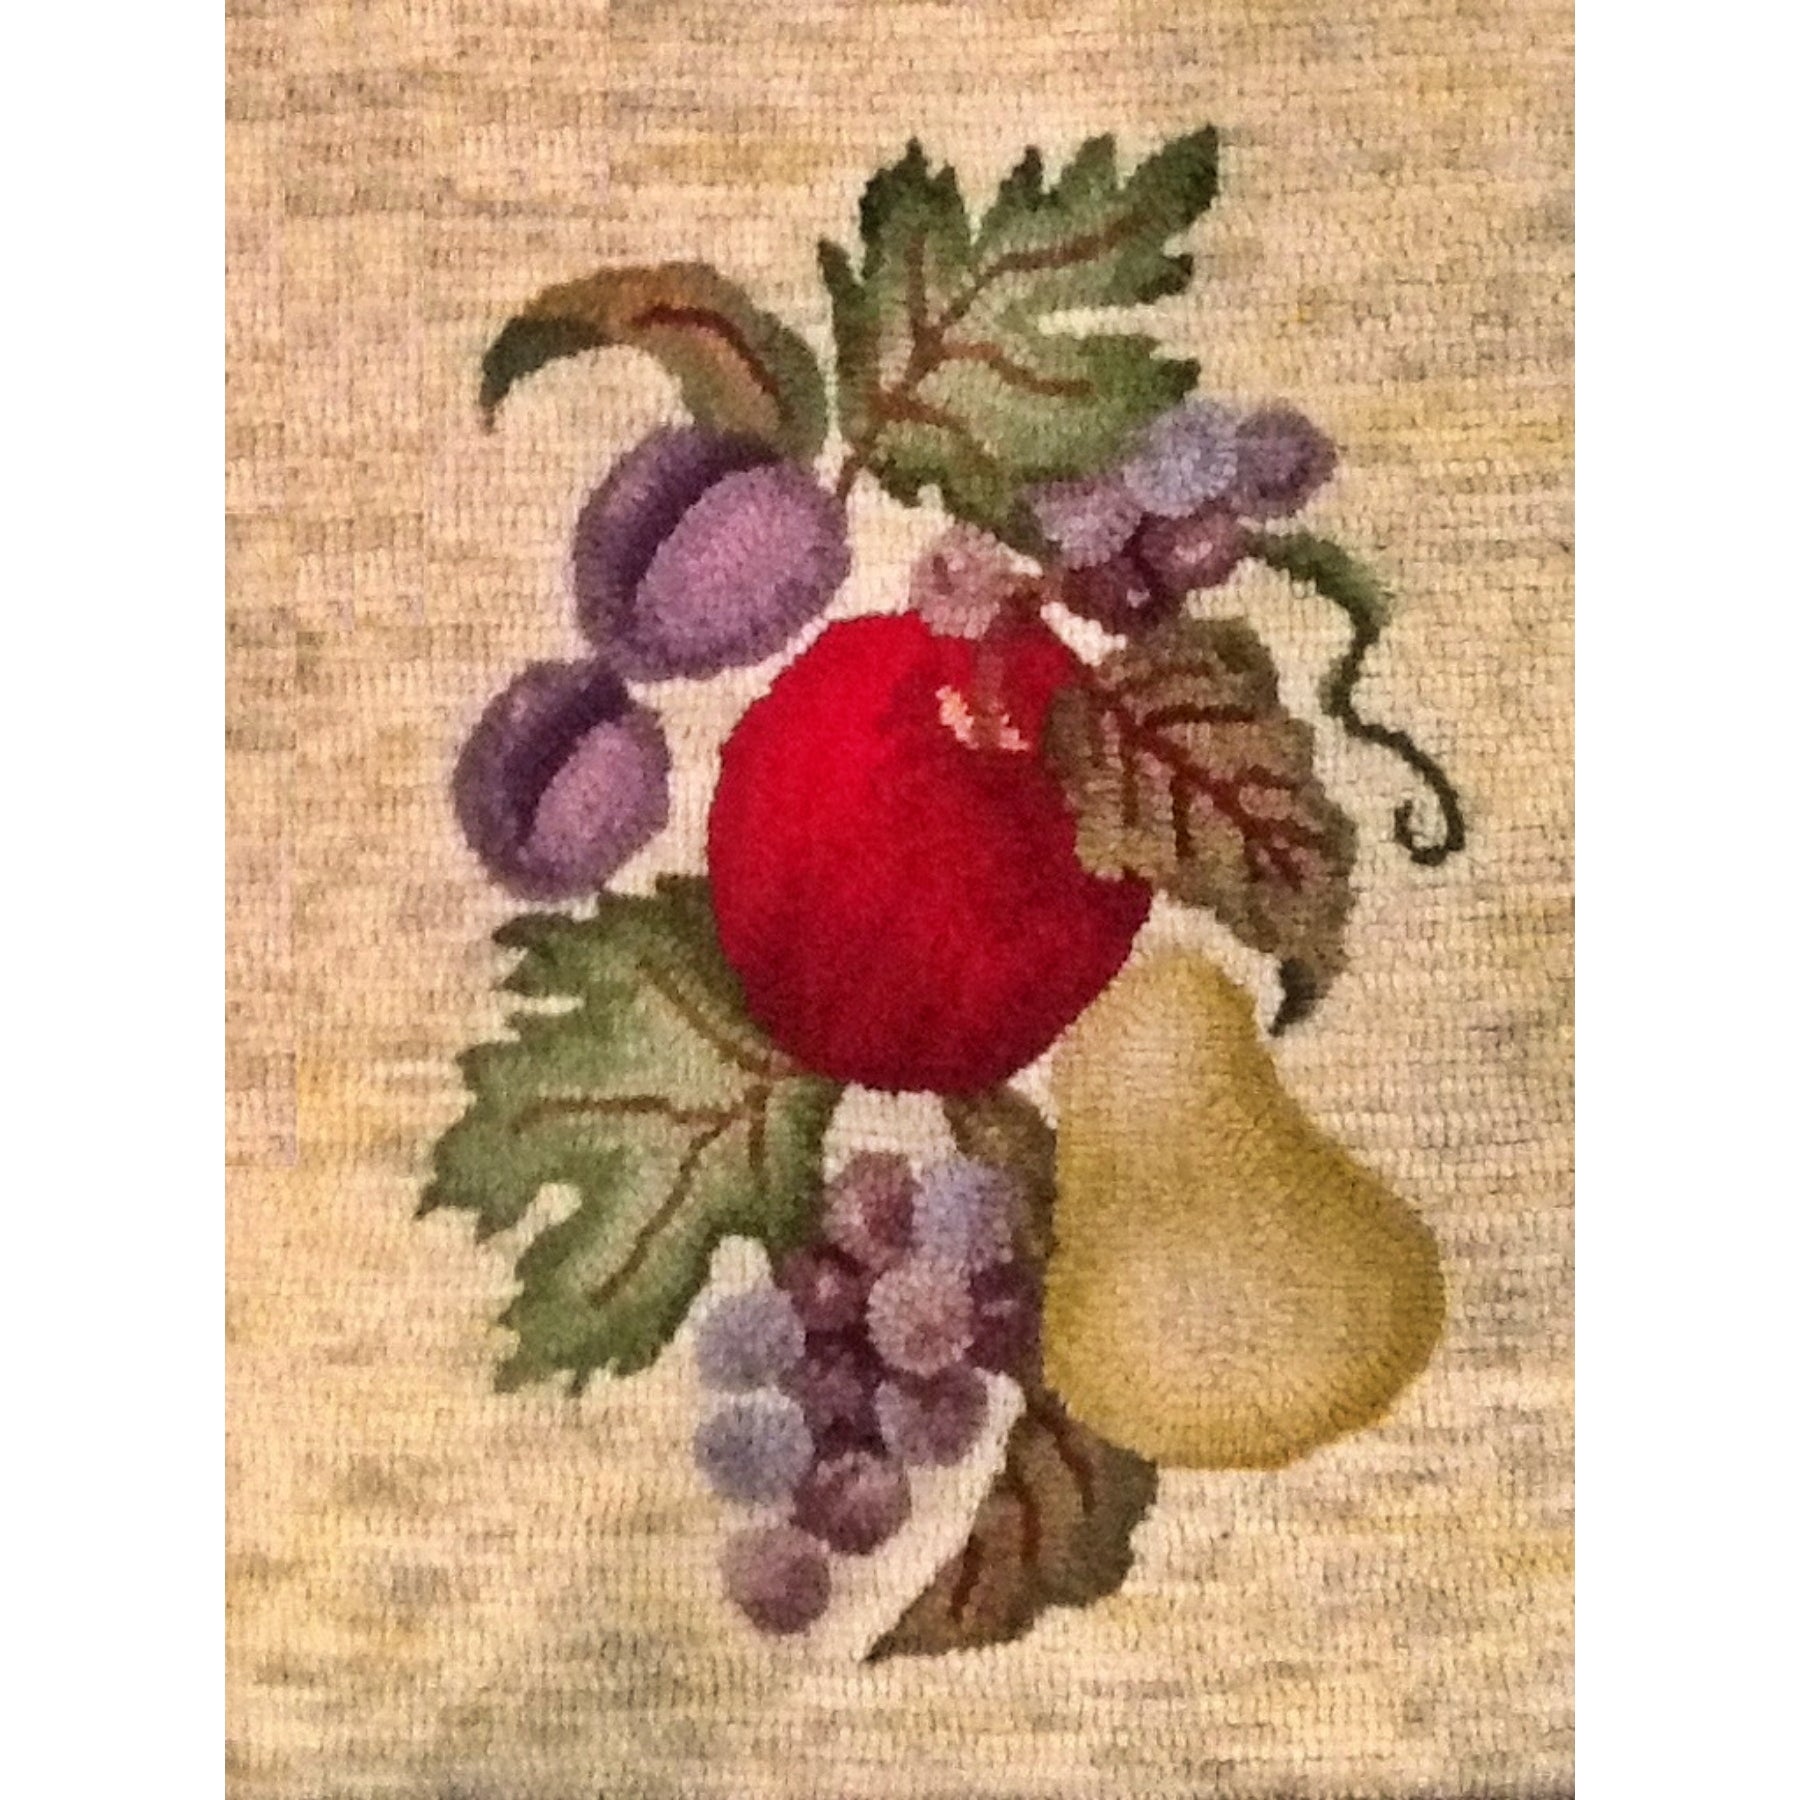 Fruit, rug hooked by Sherry Chandler